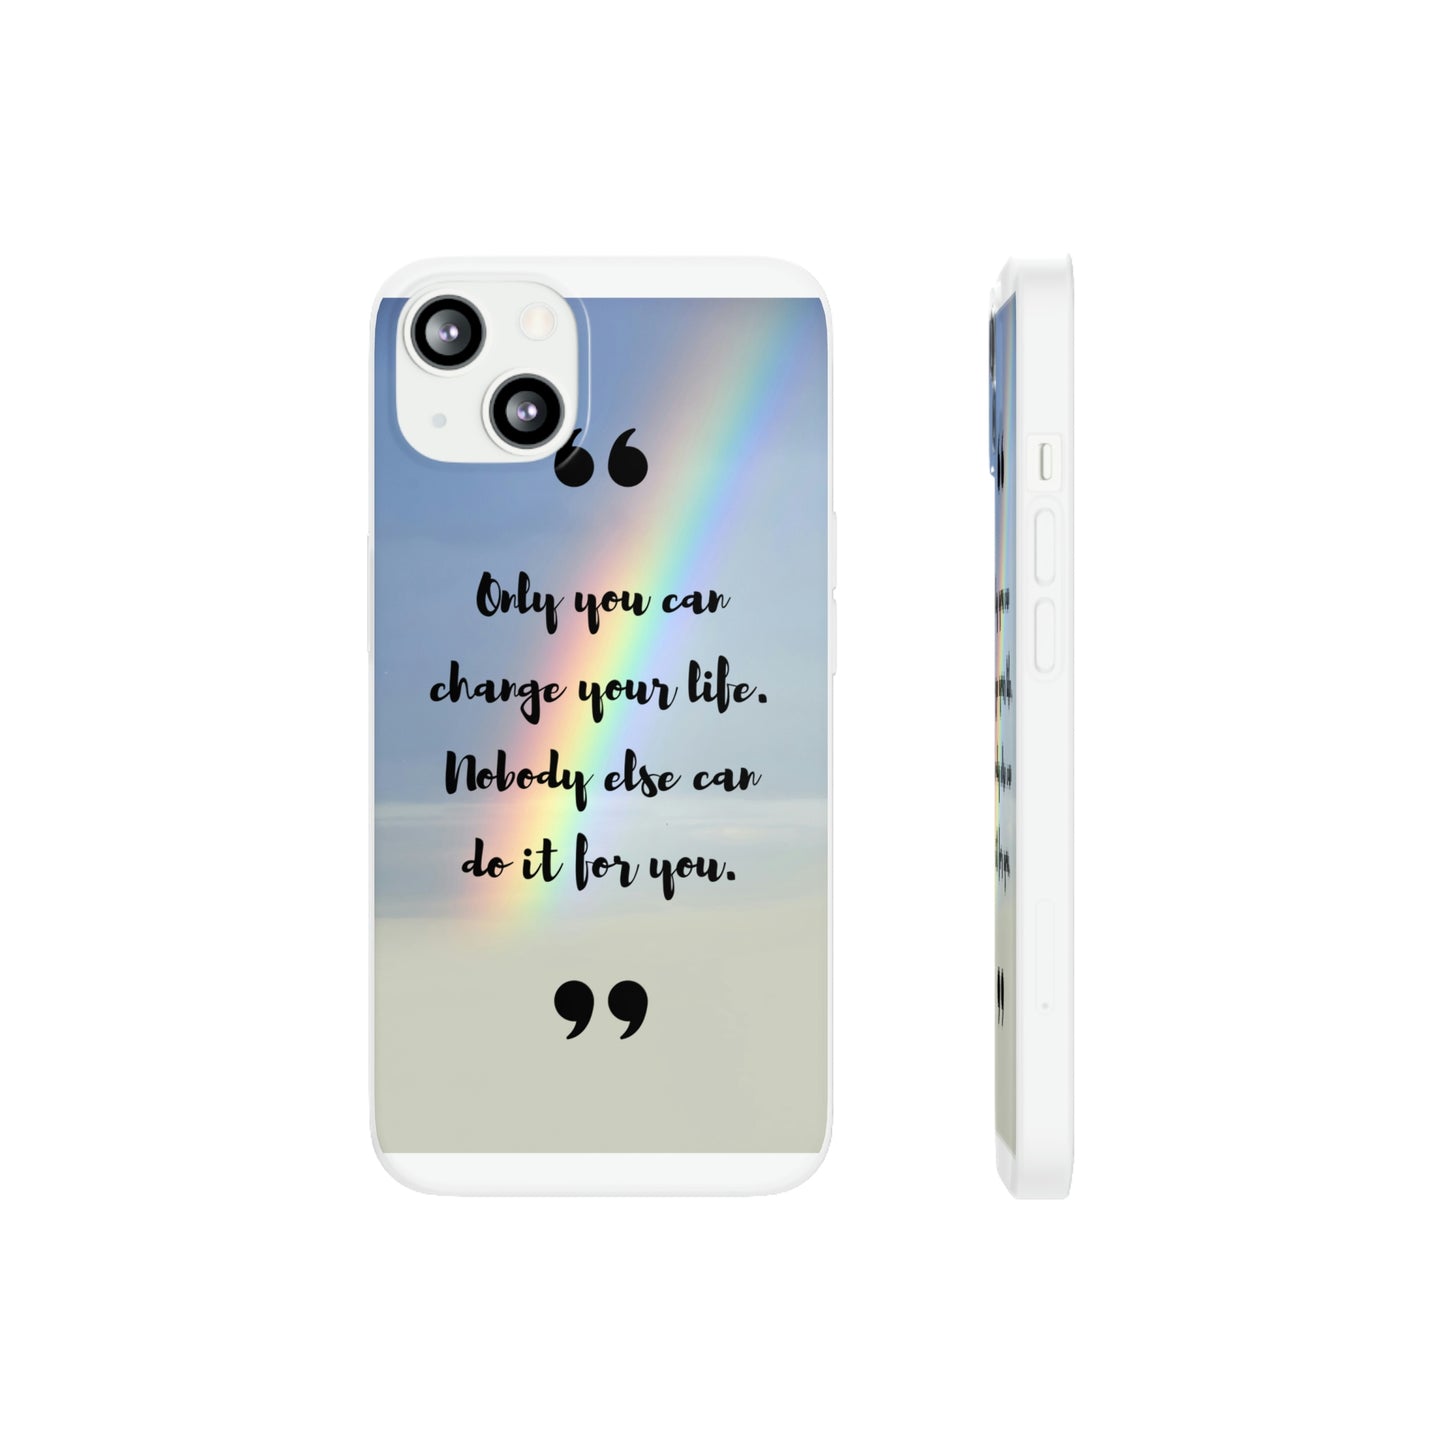 Only you can change  Flexi Cases Samsung Apple funny case protection slim design gift custom personalized protect iphone galazy S